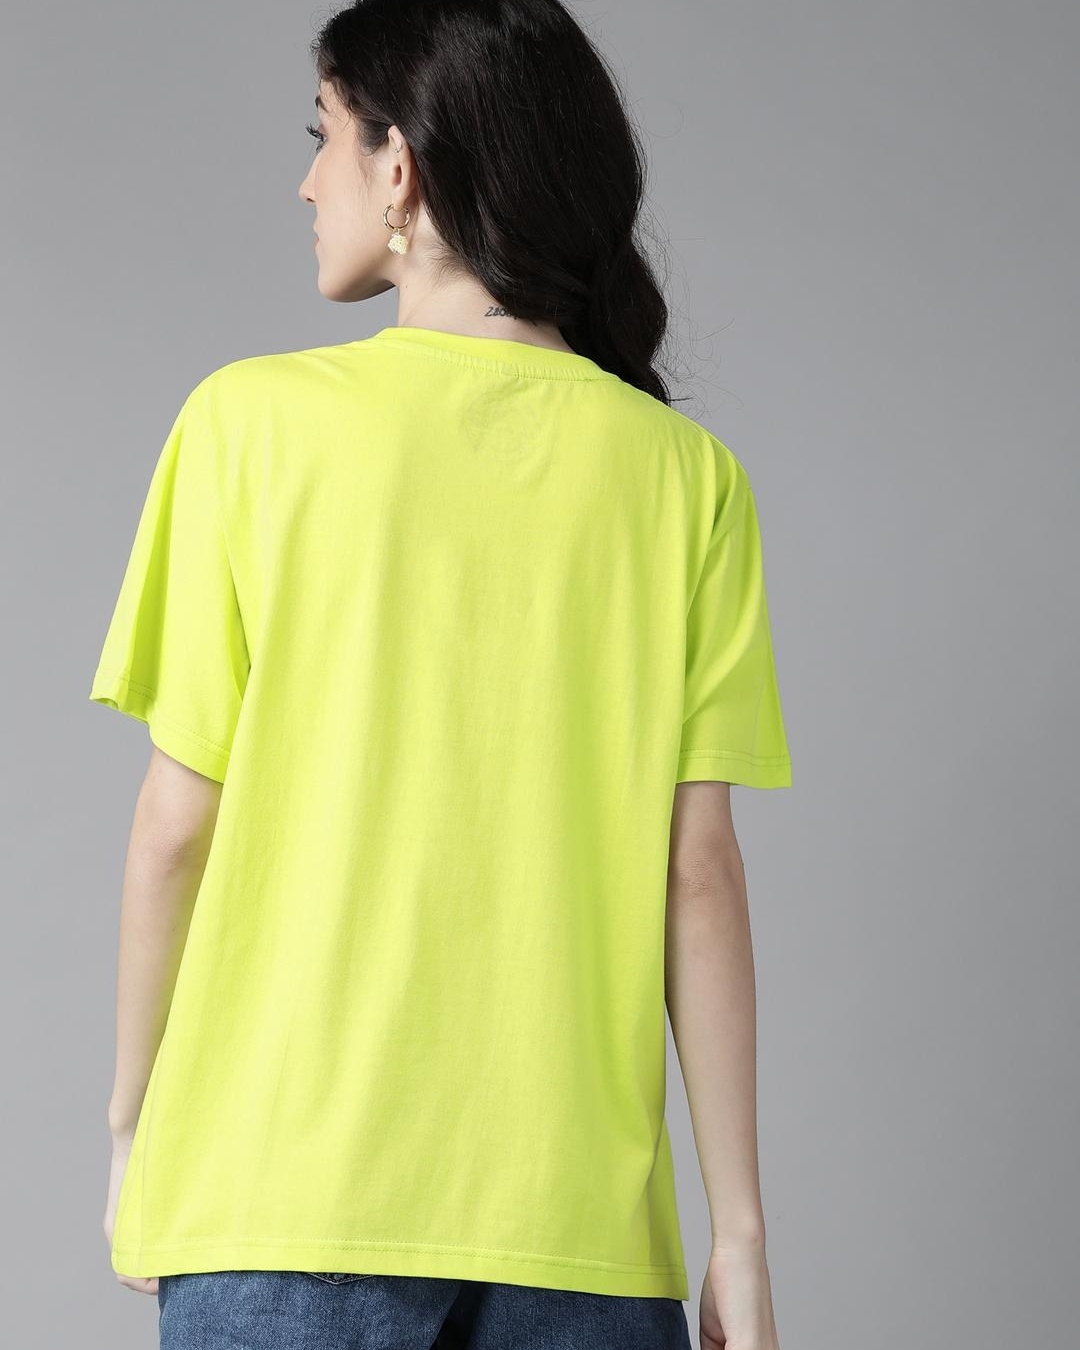 Shop Women's Yellow Graphic Printed Loose Fit T-shirt-Design